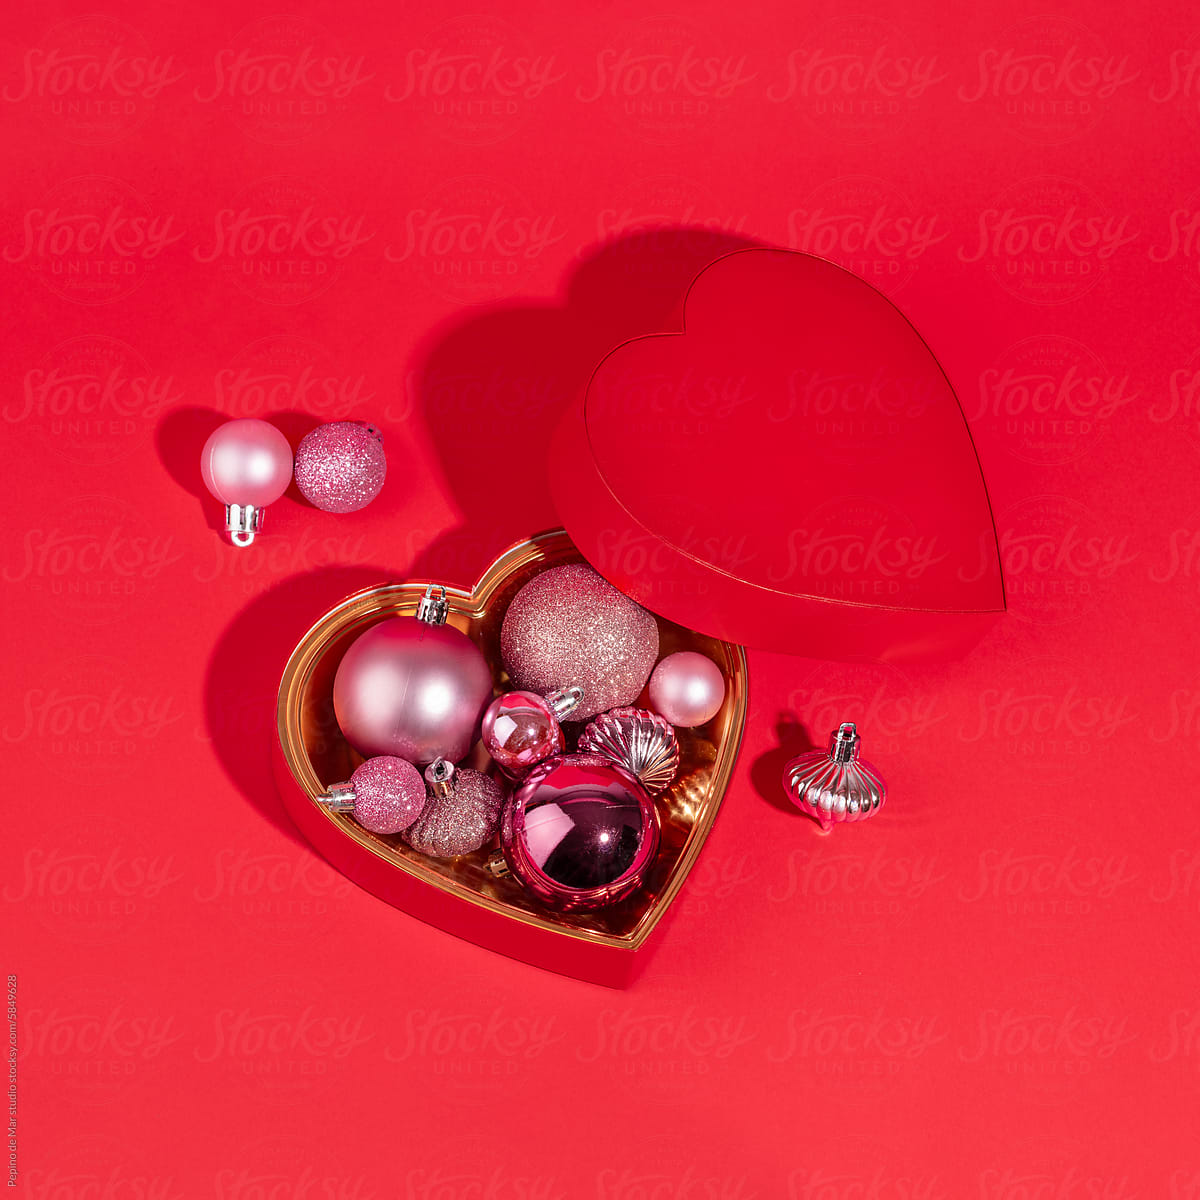 Heart-Shaped Box Filled with Pink Christmas Ornaments on Red